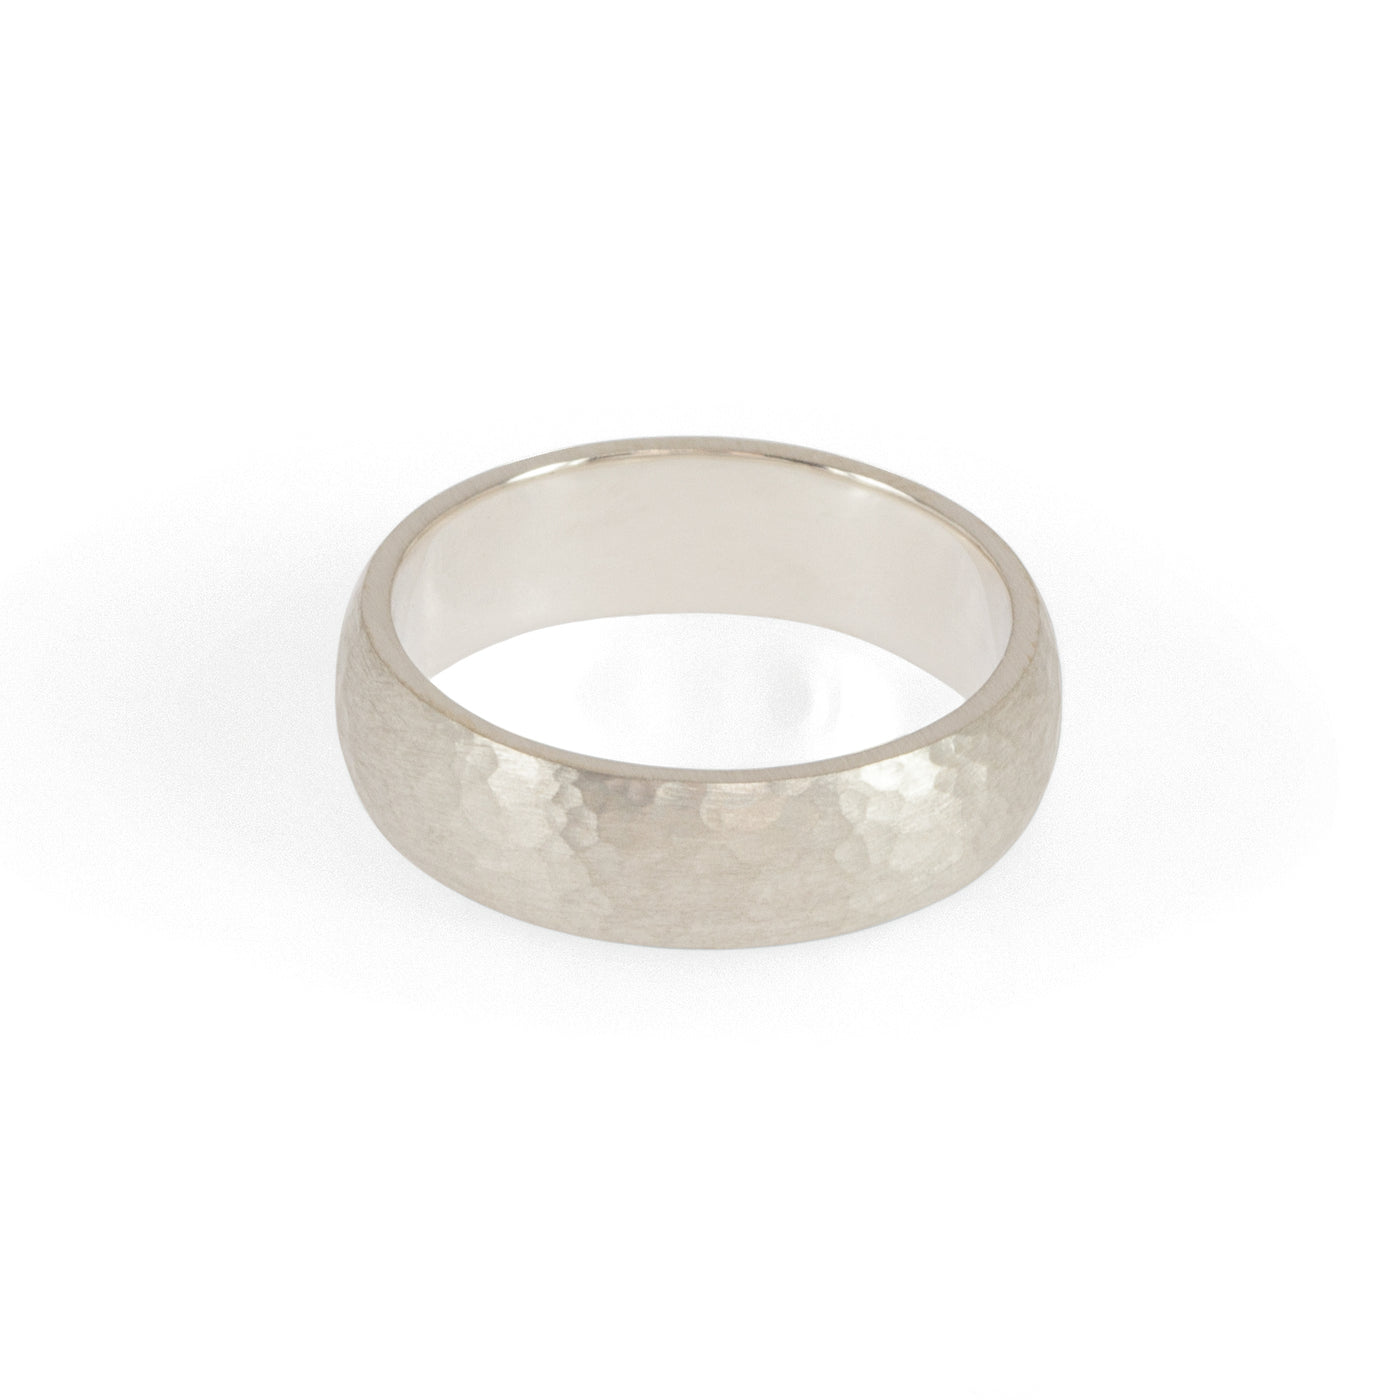 Eco-friendly silver ring. This sustainable Hammered Band is handmade in Cape Town in recycled silver from e-waste.